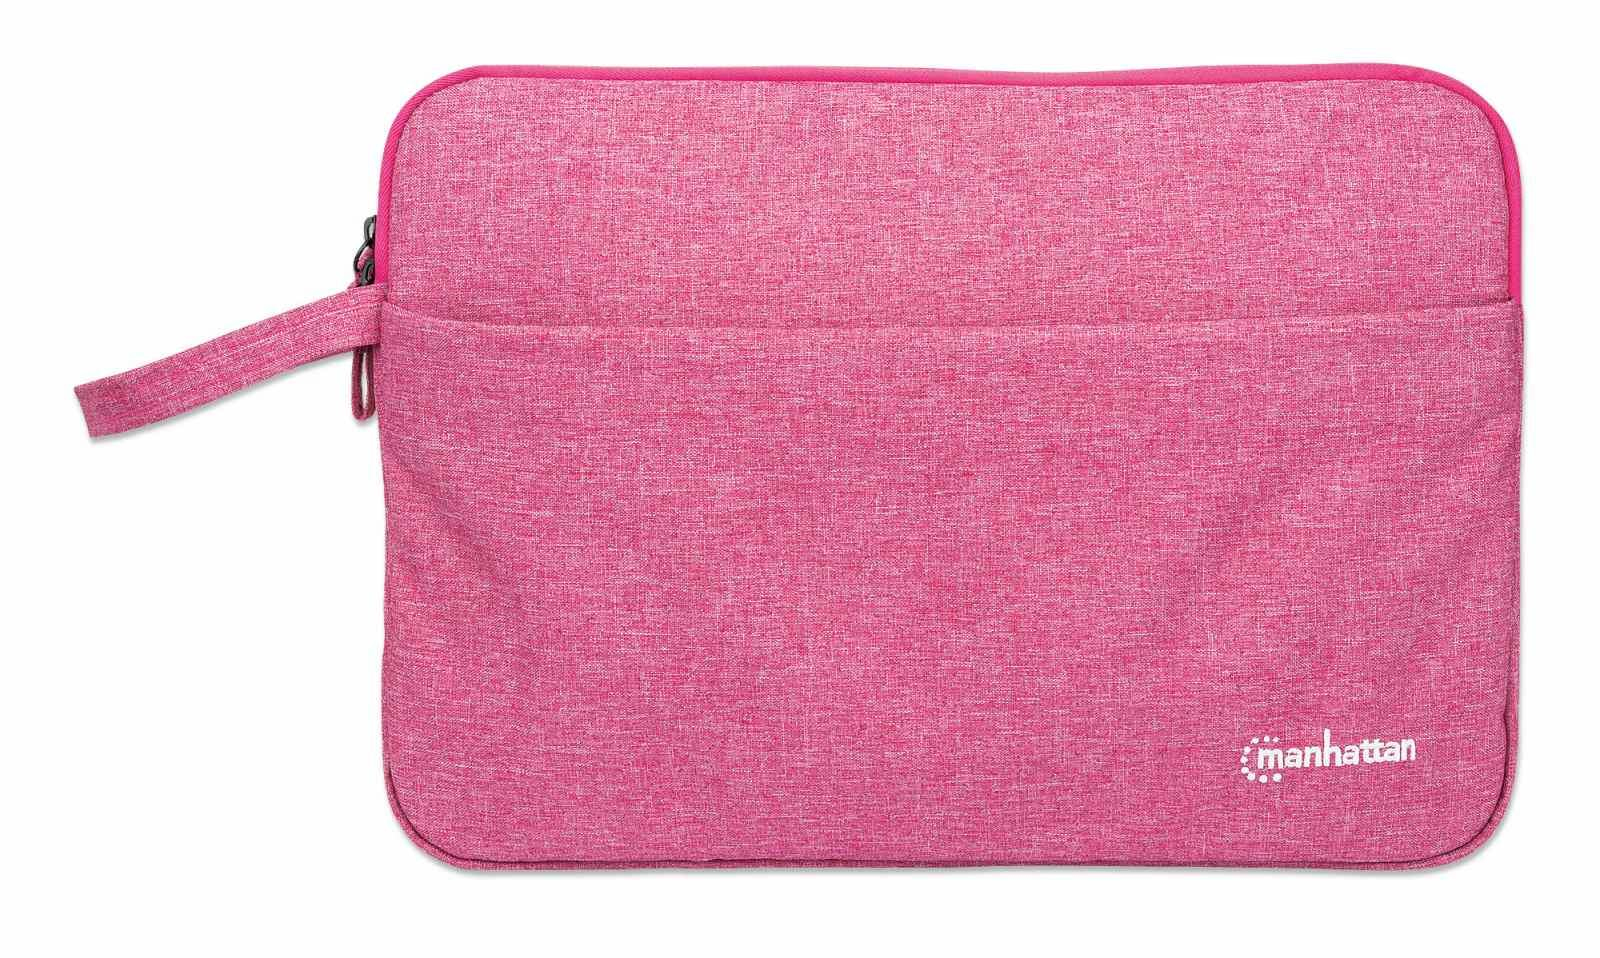 Manhattan Seattle Laptop Sleeve 14.5", Coral, Padded, Extra Soft Internal Cushioning, Main Compartment with double zips, Zippered Front Pocket, Carry Loop, Water Resistant and Durable